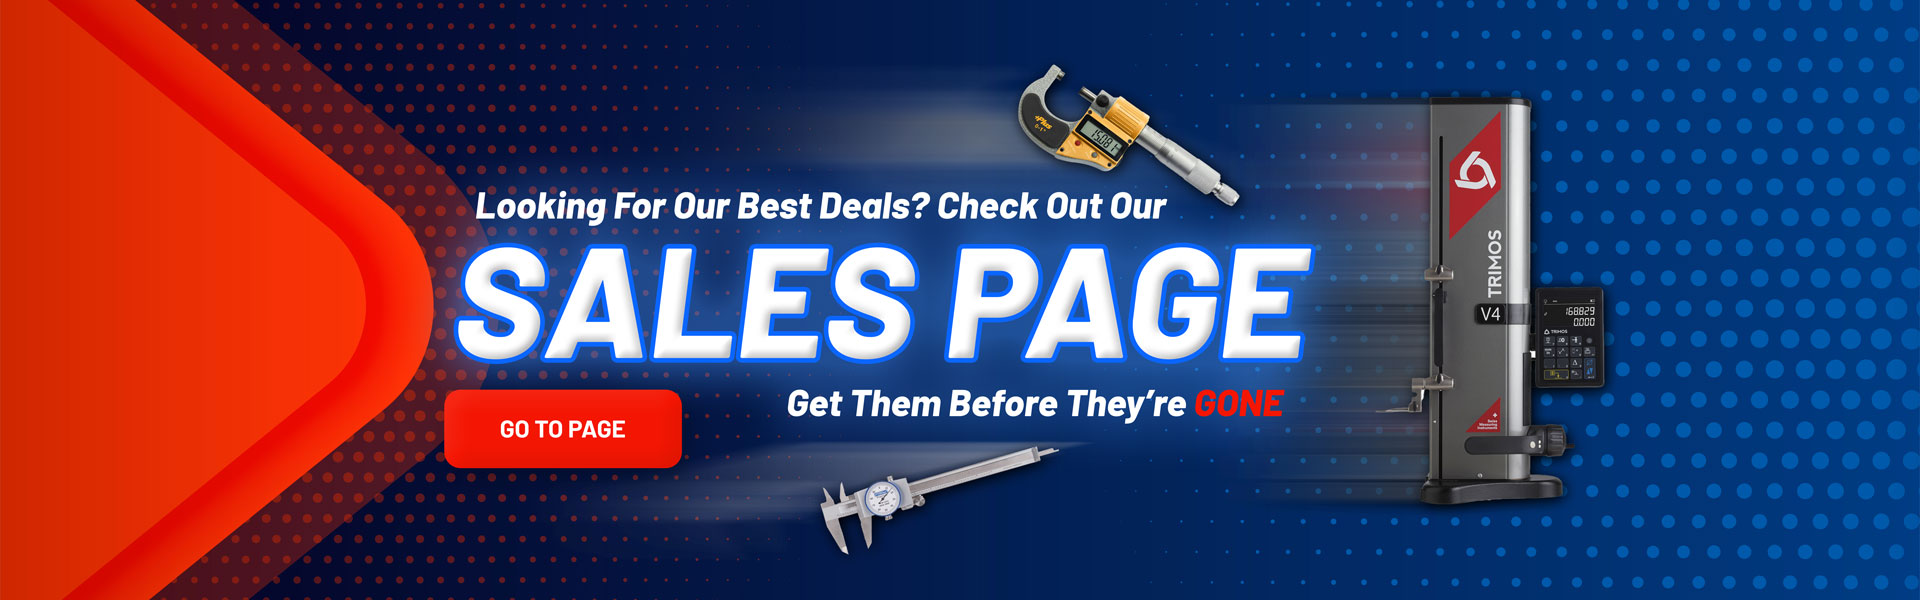 sales-page-banner